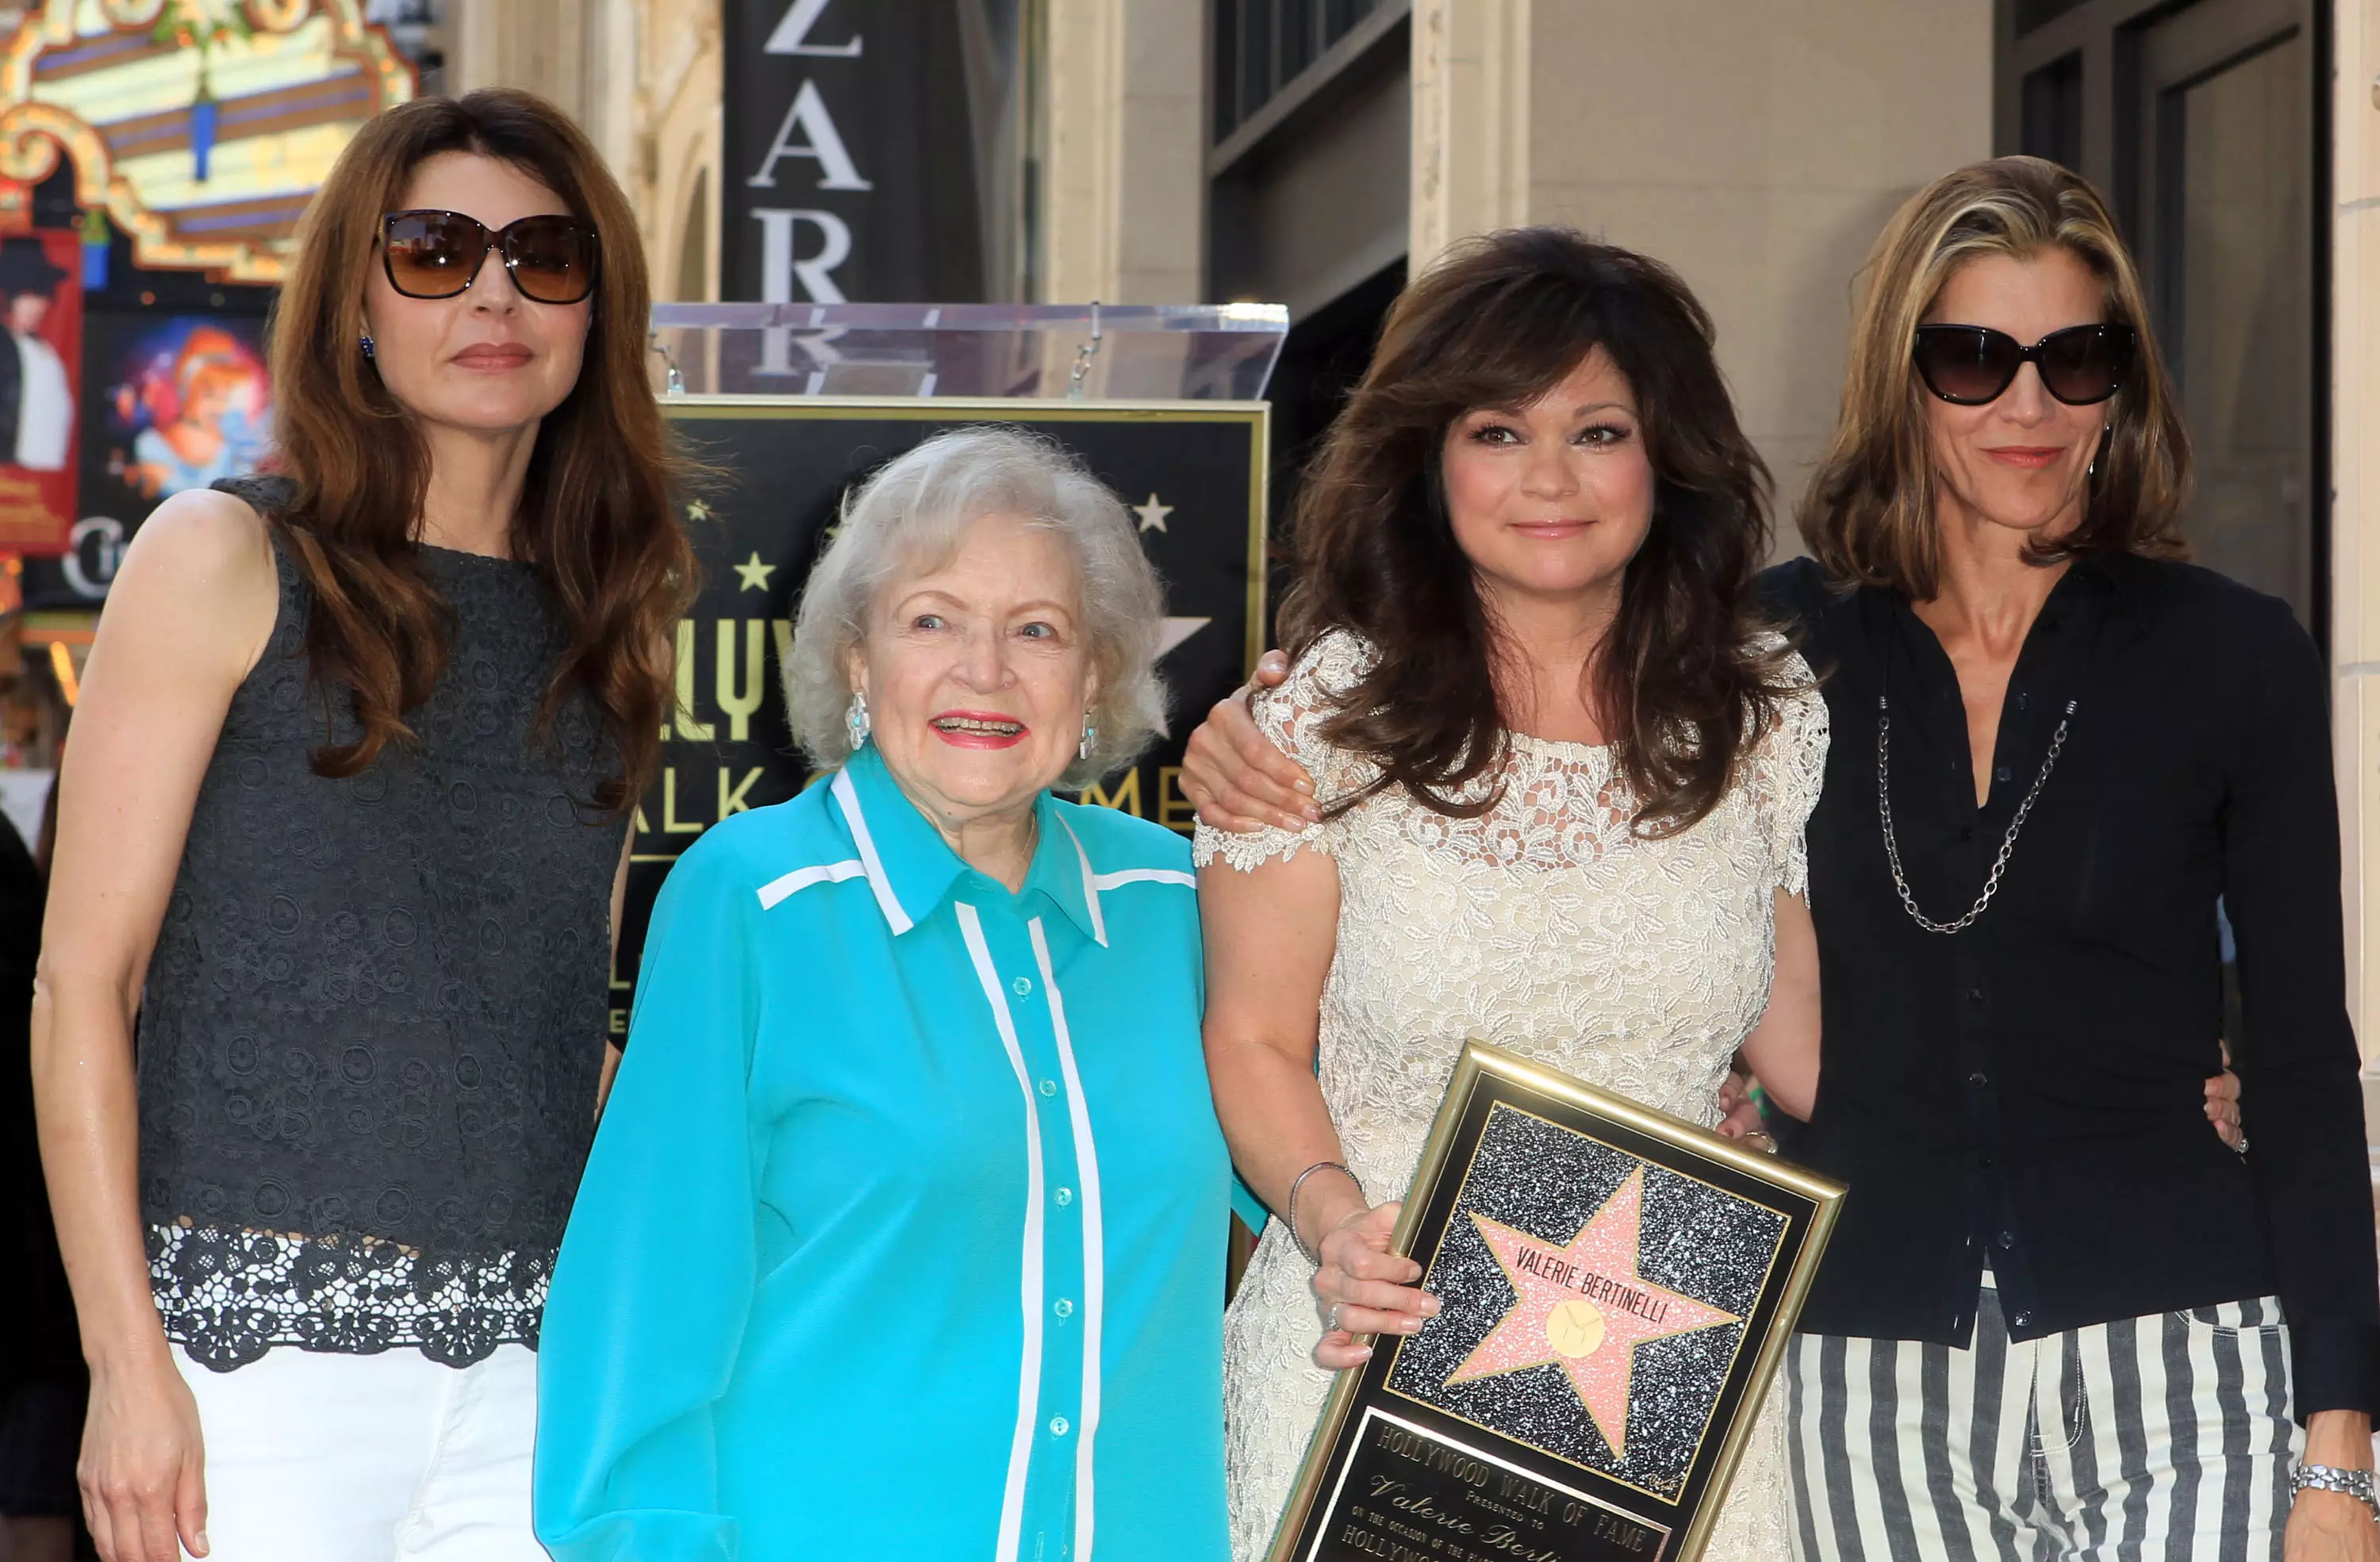 Betty White with Jane Leeves, Valerie Bertinelli and Wendie Malick.